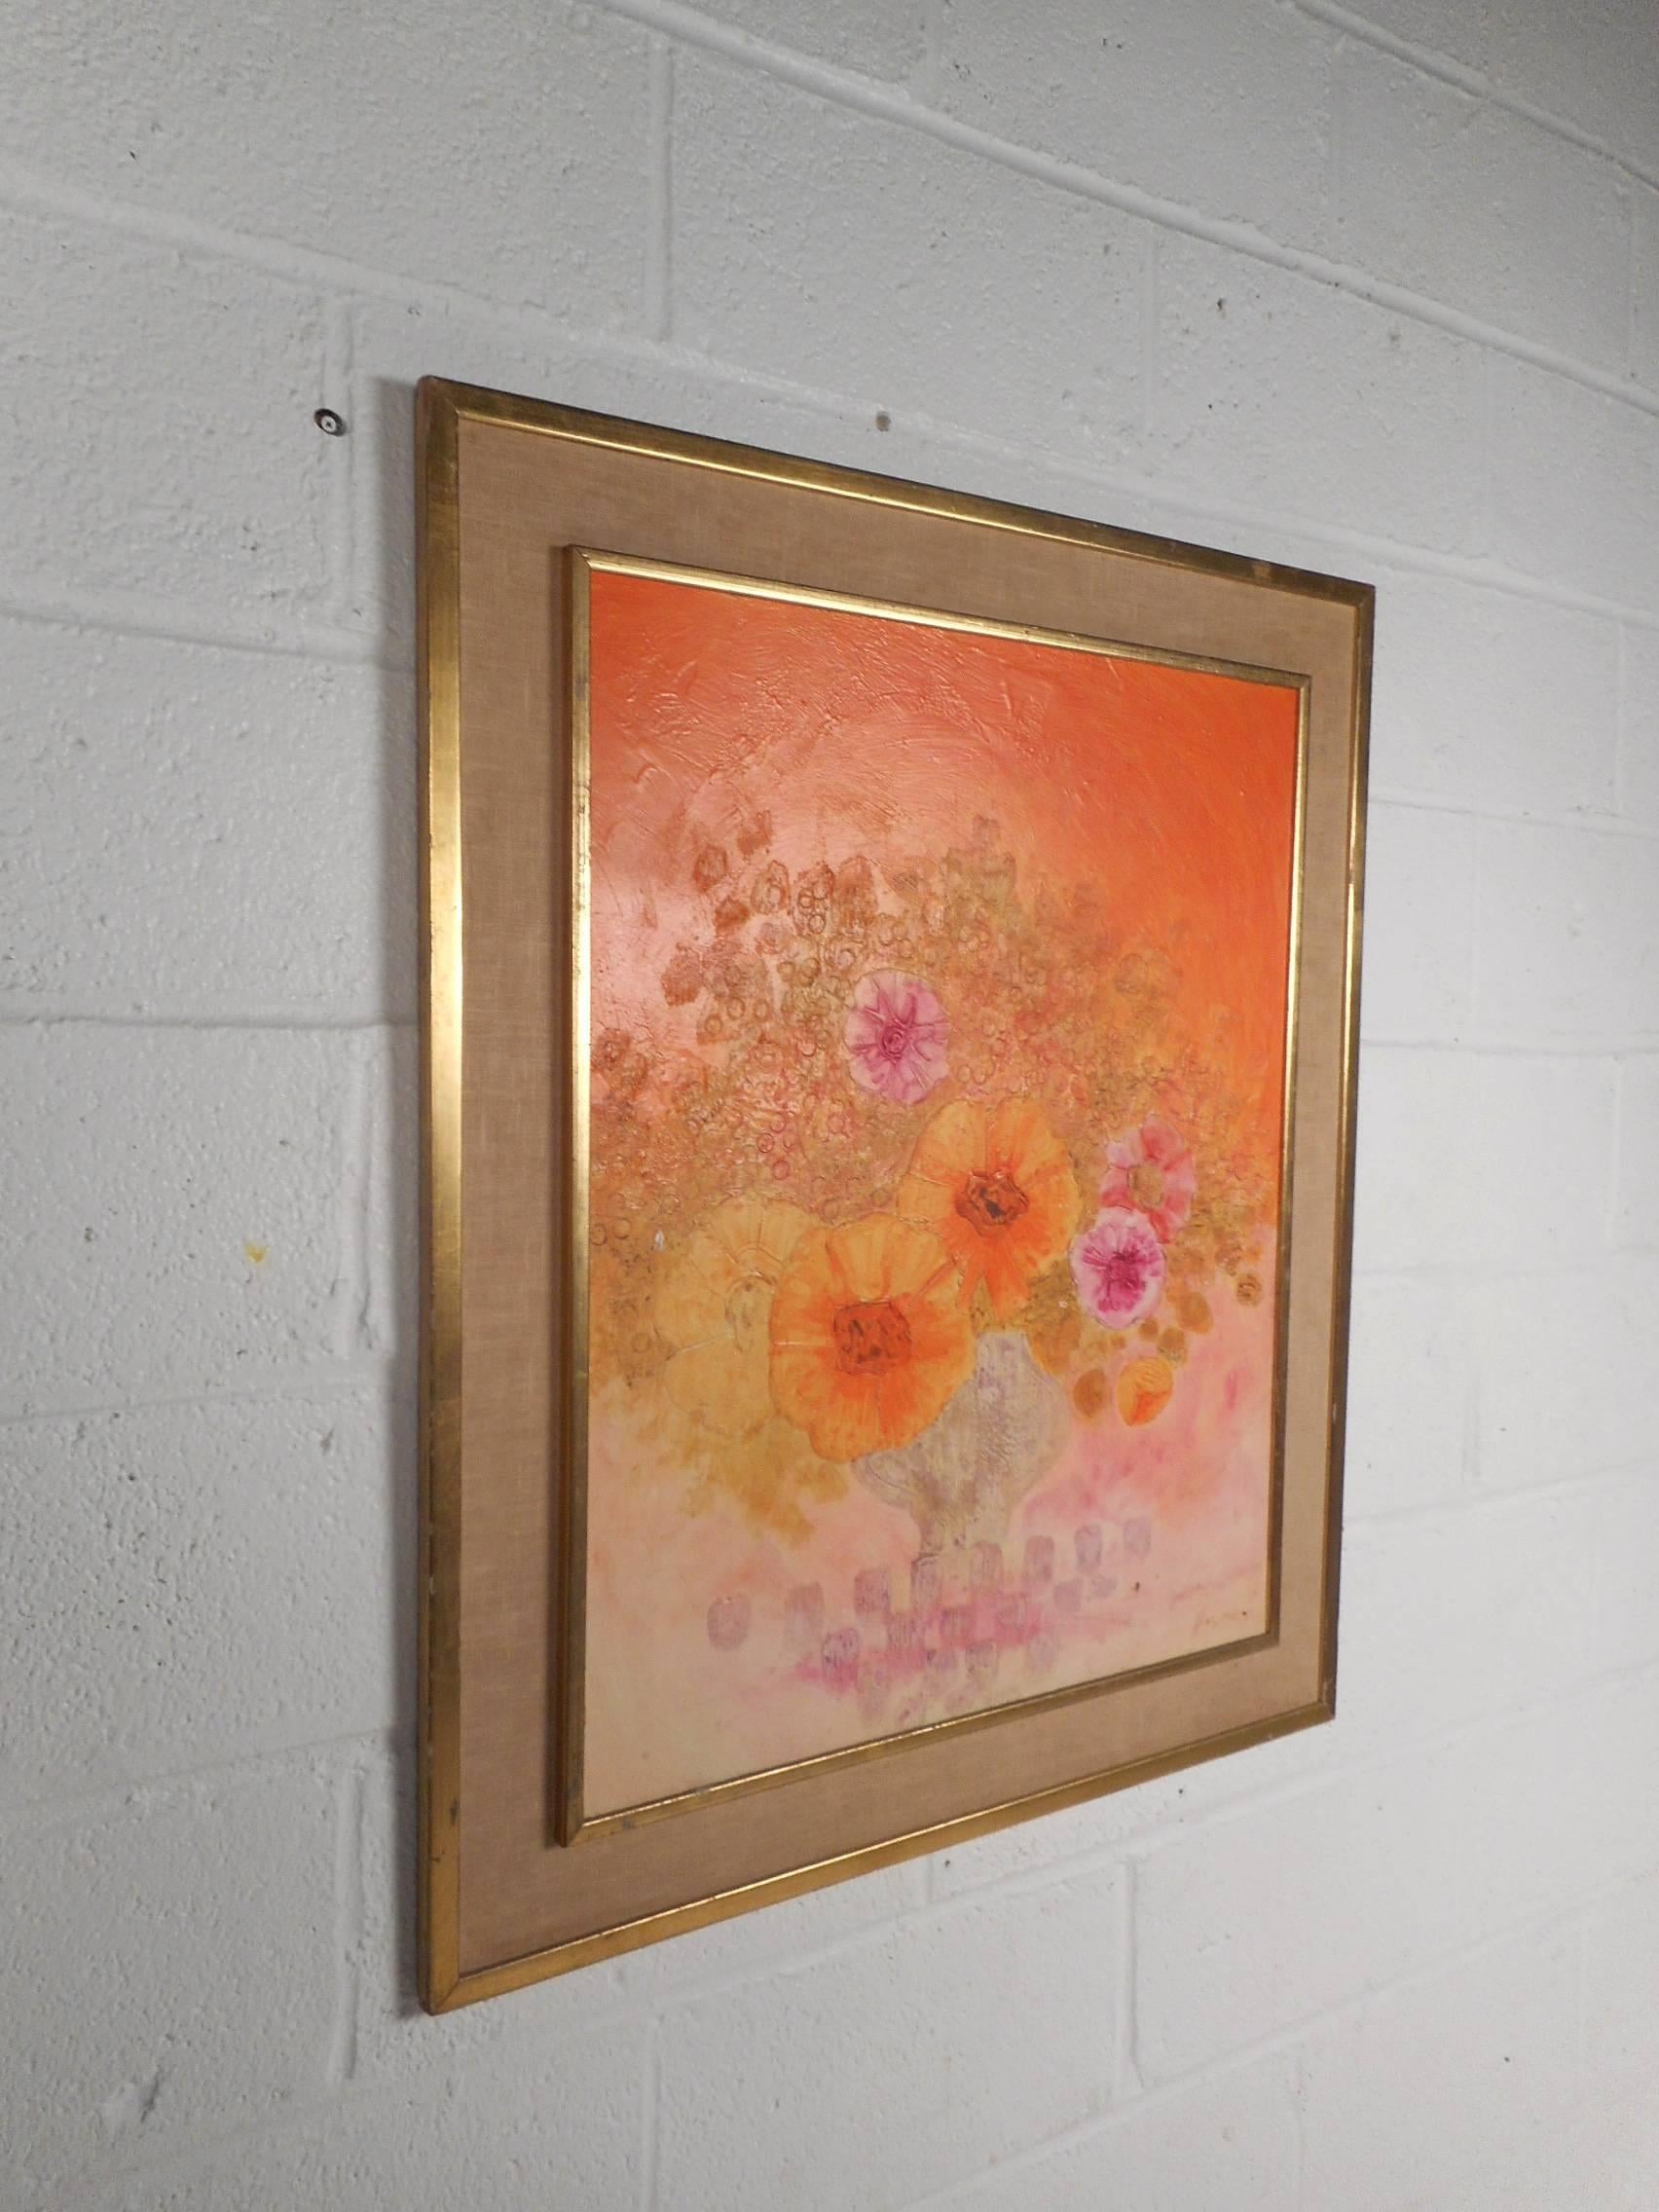 This stunning abstract oil painting is an elaborate portrayal of a colorful floral arrangement. The exquisite detail and incredibly bright colors are sure to make an impression in any home, business, or office. Please confirm item location (NY or